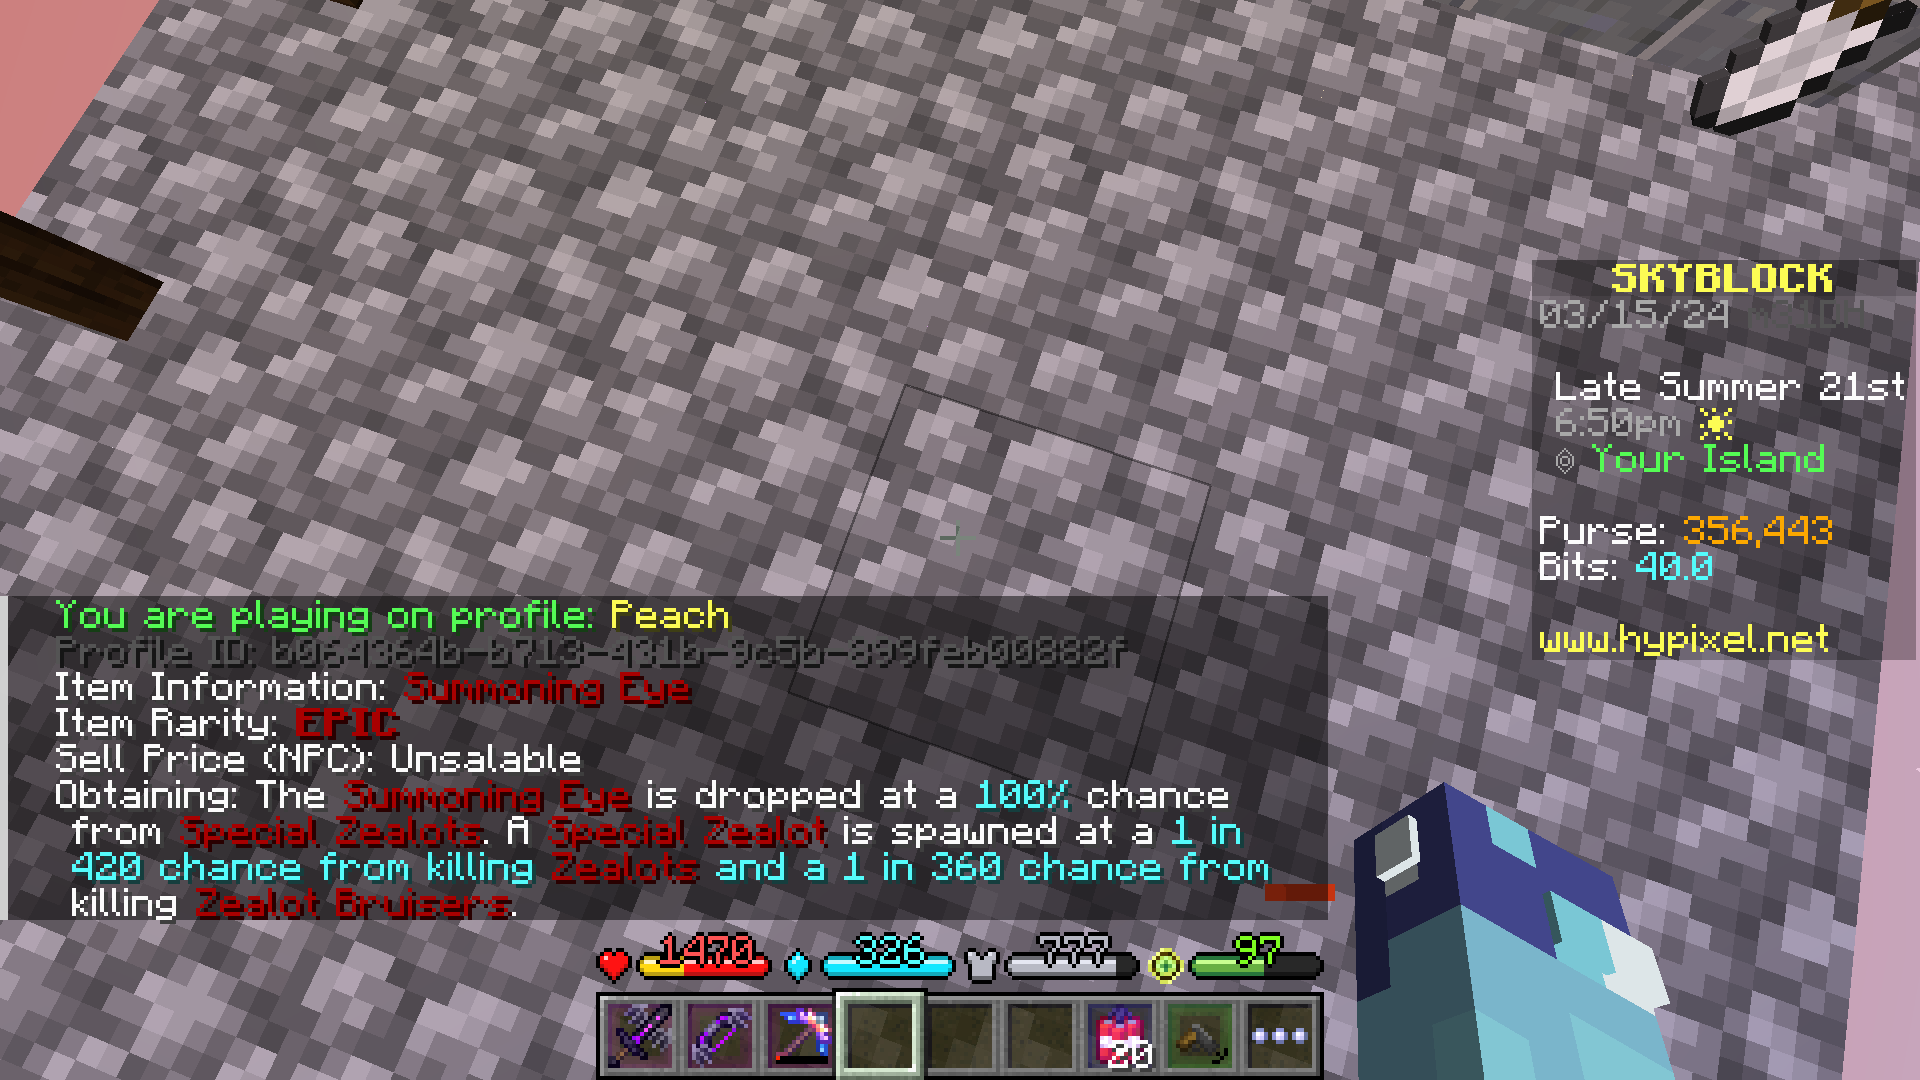 This image shows the /sbiteminfo command being used in Hypixel SkyBlock.